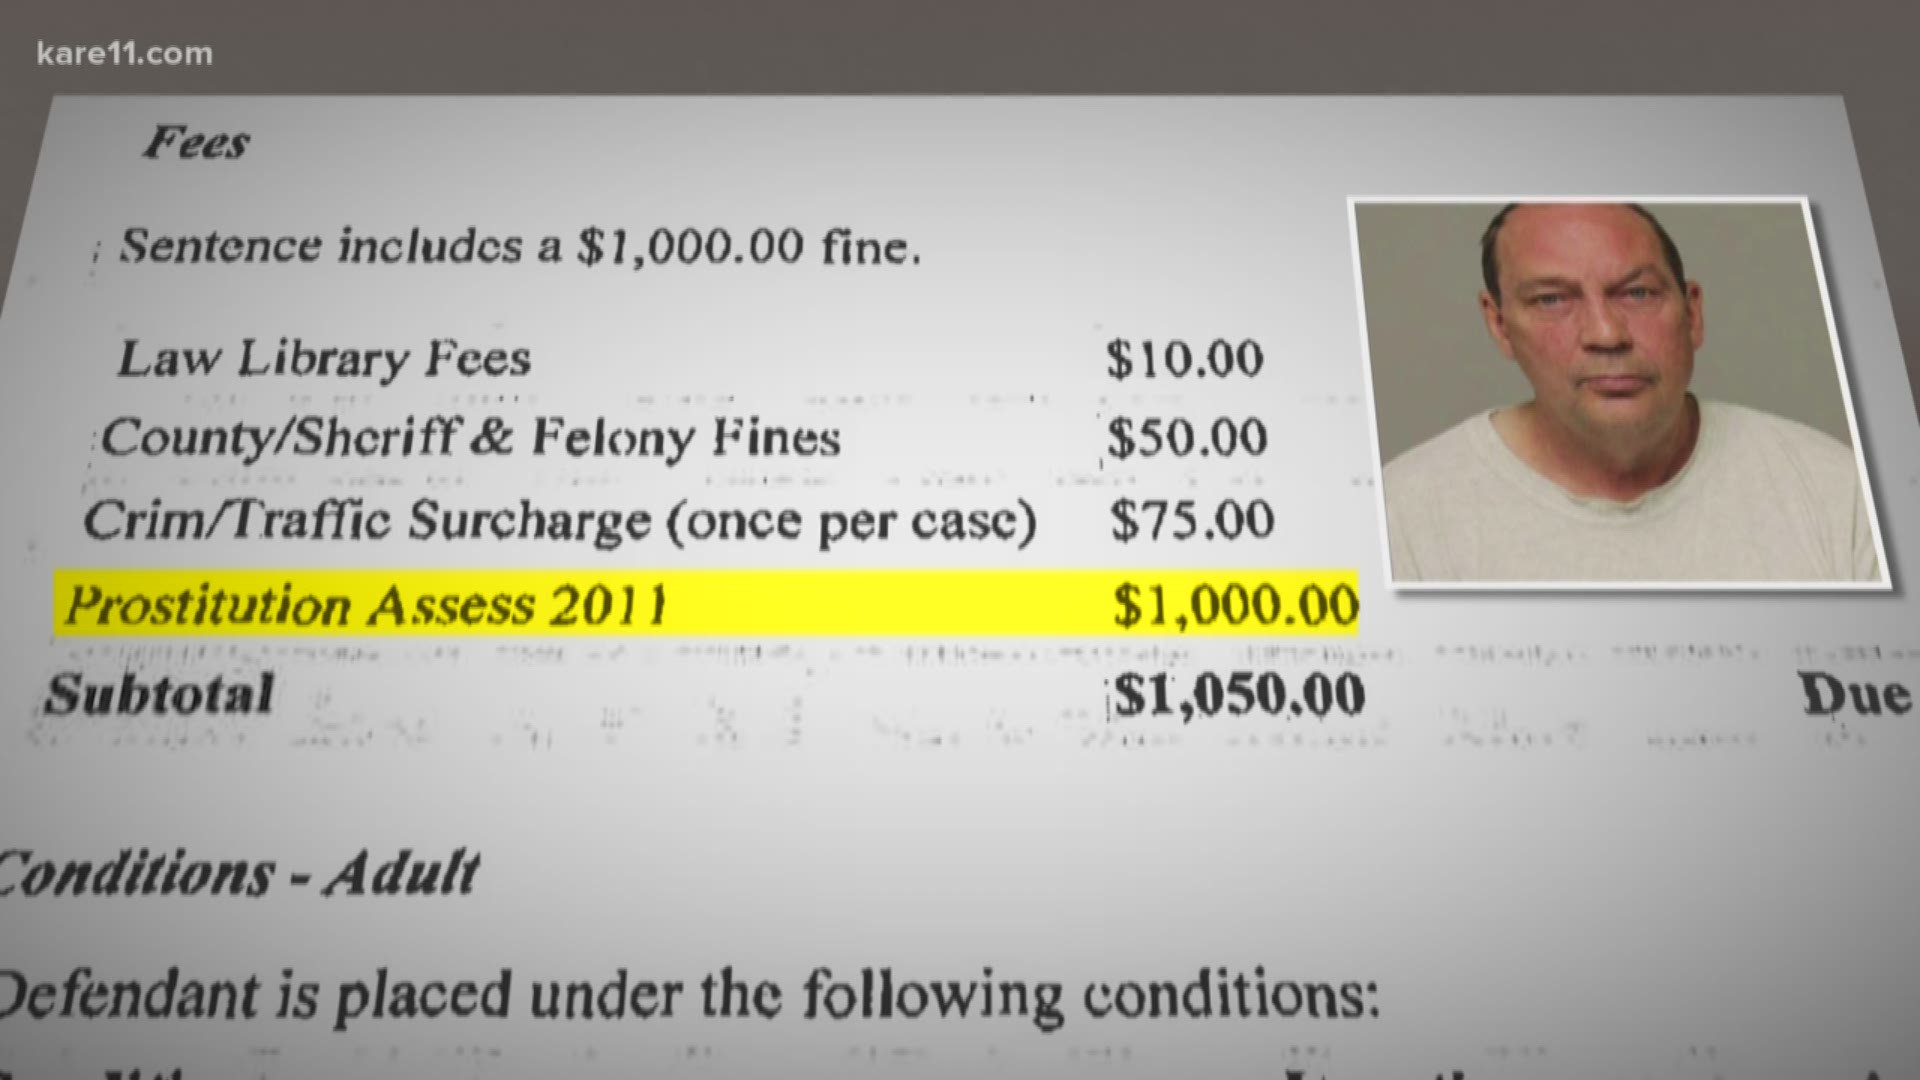 Police and prosecutors in Minnesota struggle to account for more than $34,000 in court fines earmarked to fight sexual exploitation. Watch the KARE 11 Investigation: https://kare11.tv/2BmOzfC